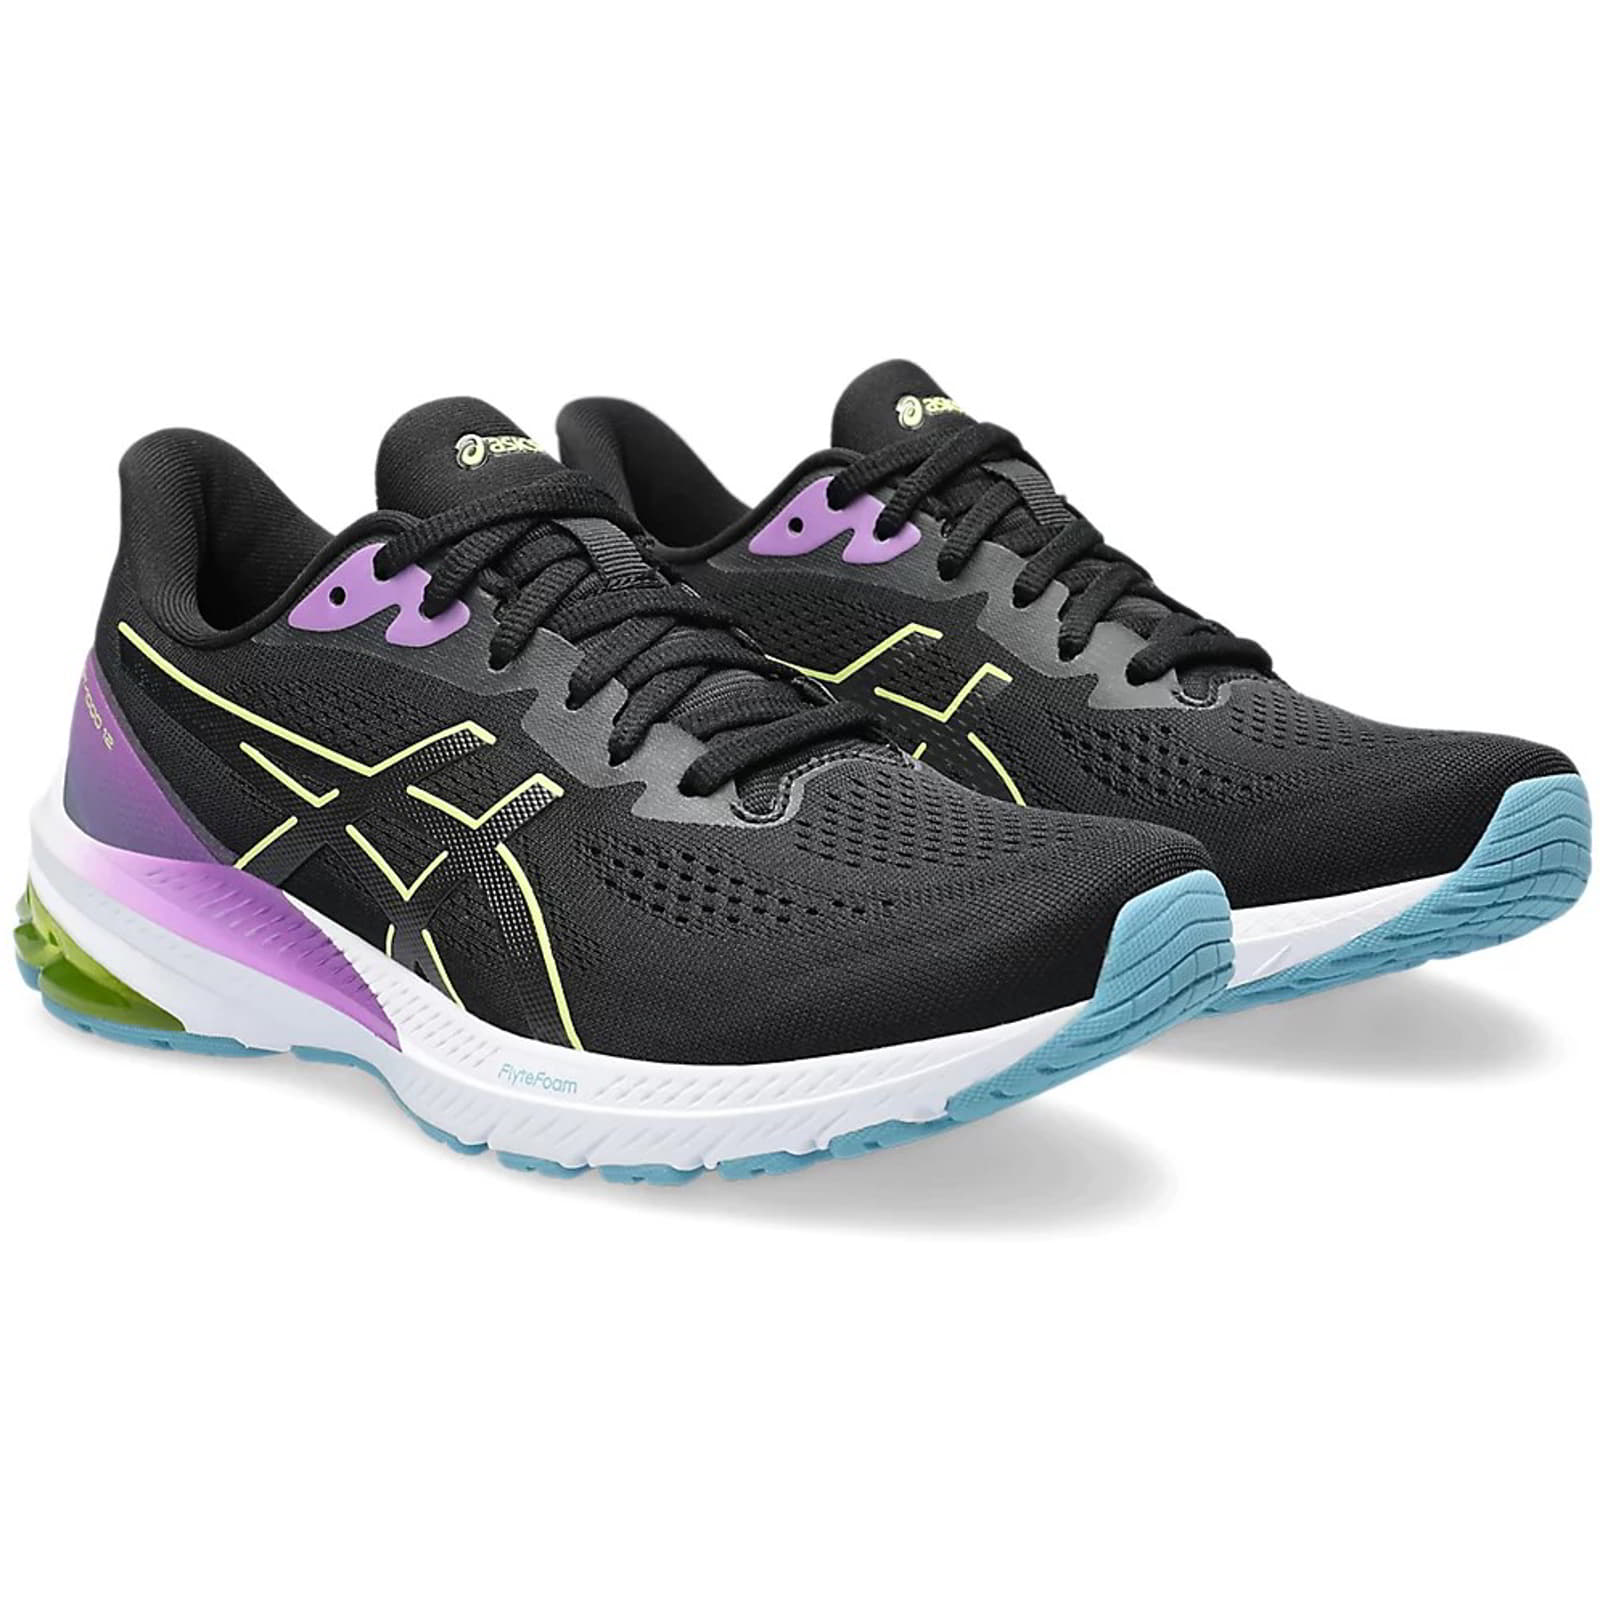 Asics Women's GT-1000 12 Running Shoes Trainers - UK 5